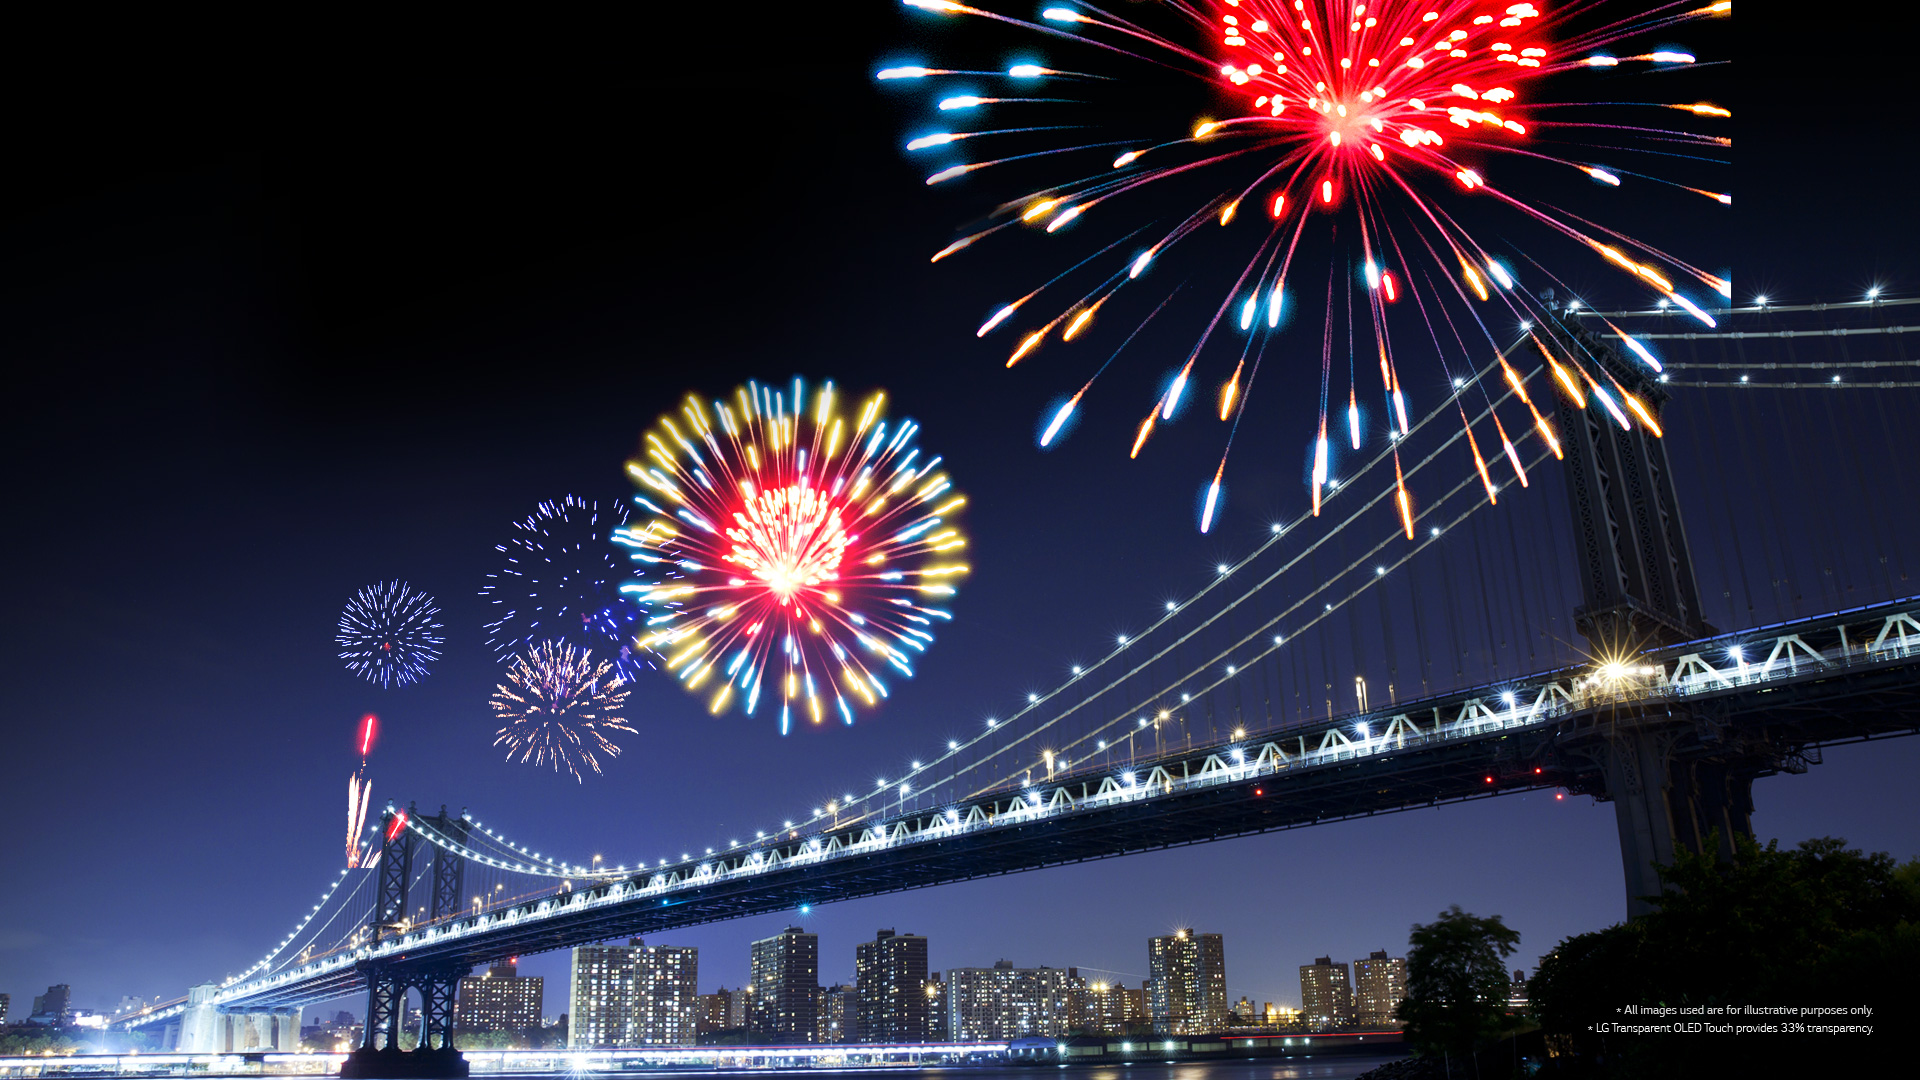 Fireworks displayed on the screen overlaid with the landscape view of the bridge in the city at night in the background.